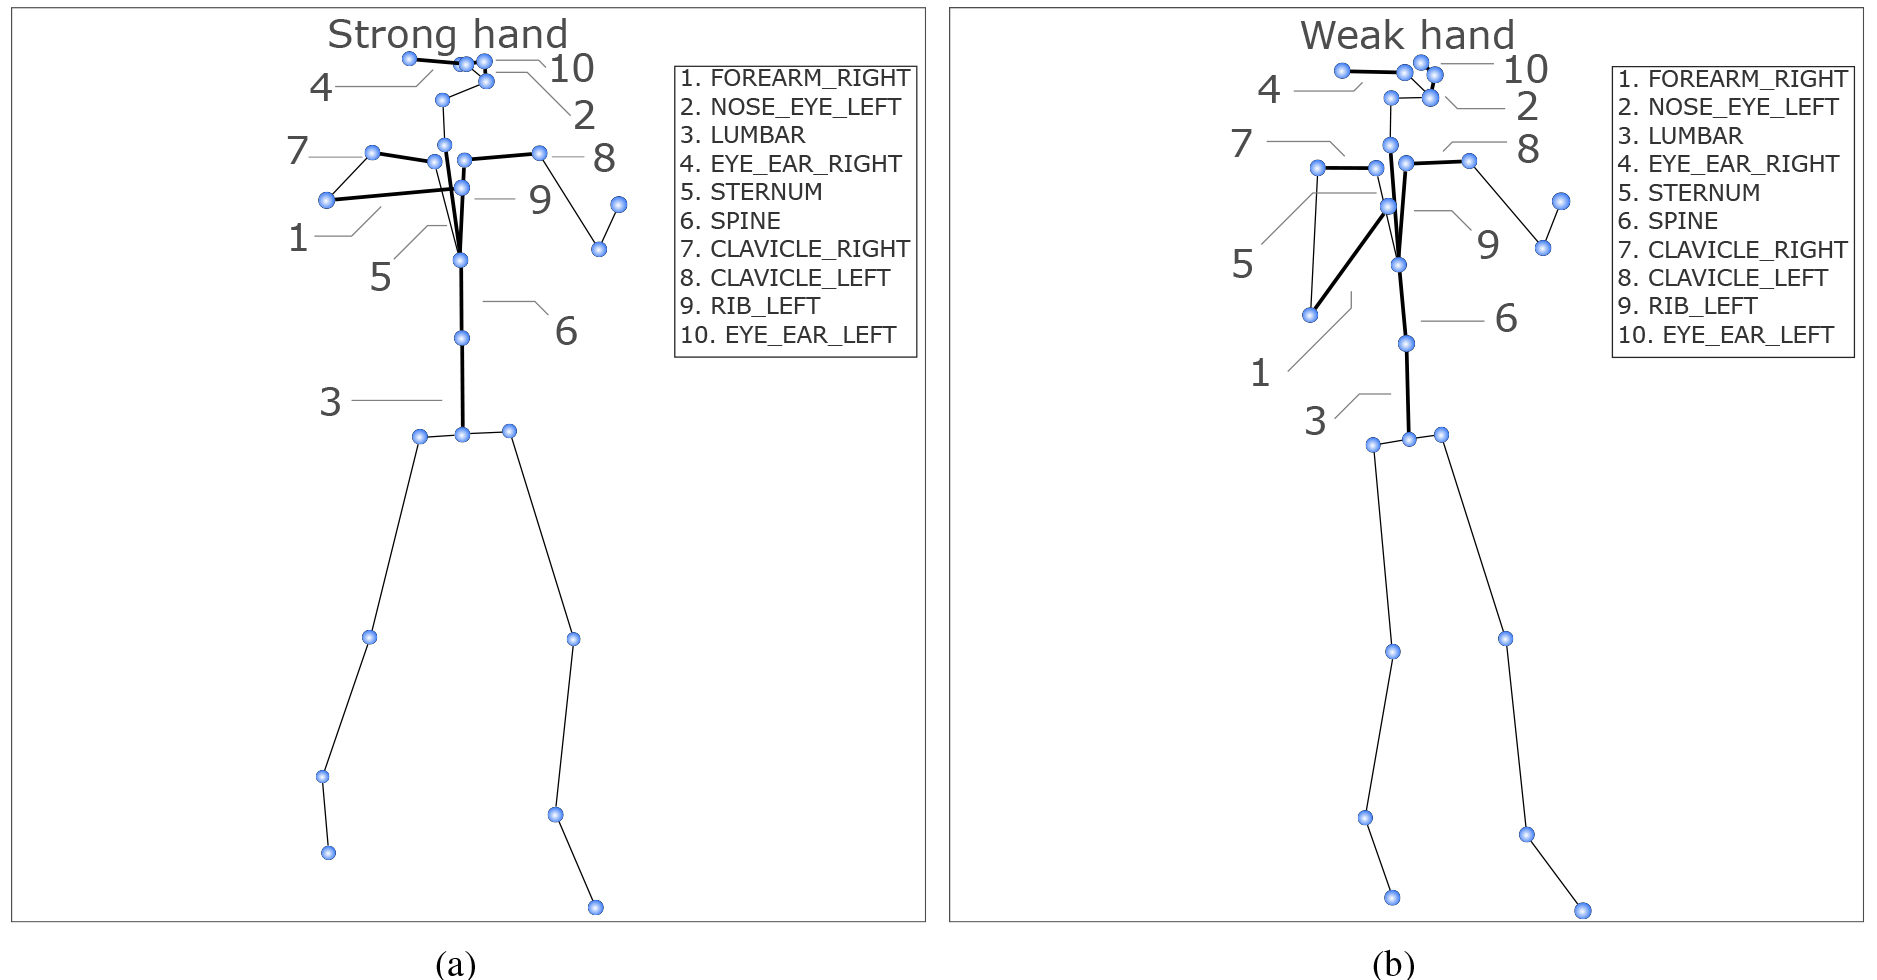 Strong and weak hand comparison. Shows a comparison of one of the participants in the act of firing their weapon with their (a) strong hand and (b) weak hand. Highlighted are the top 10 bones from the overall attention statistics for the shooting hand task (Table 6). Note that all left-handed samples were swapped to a right-handed orientation.